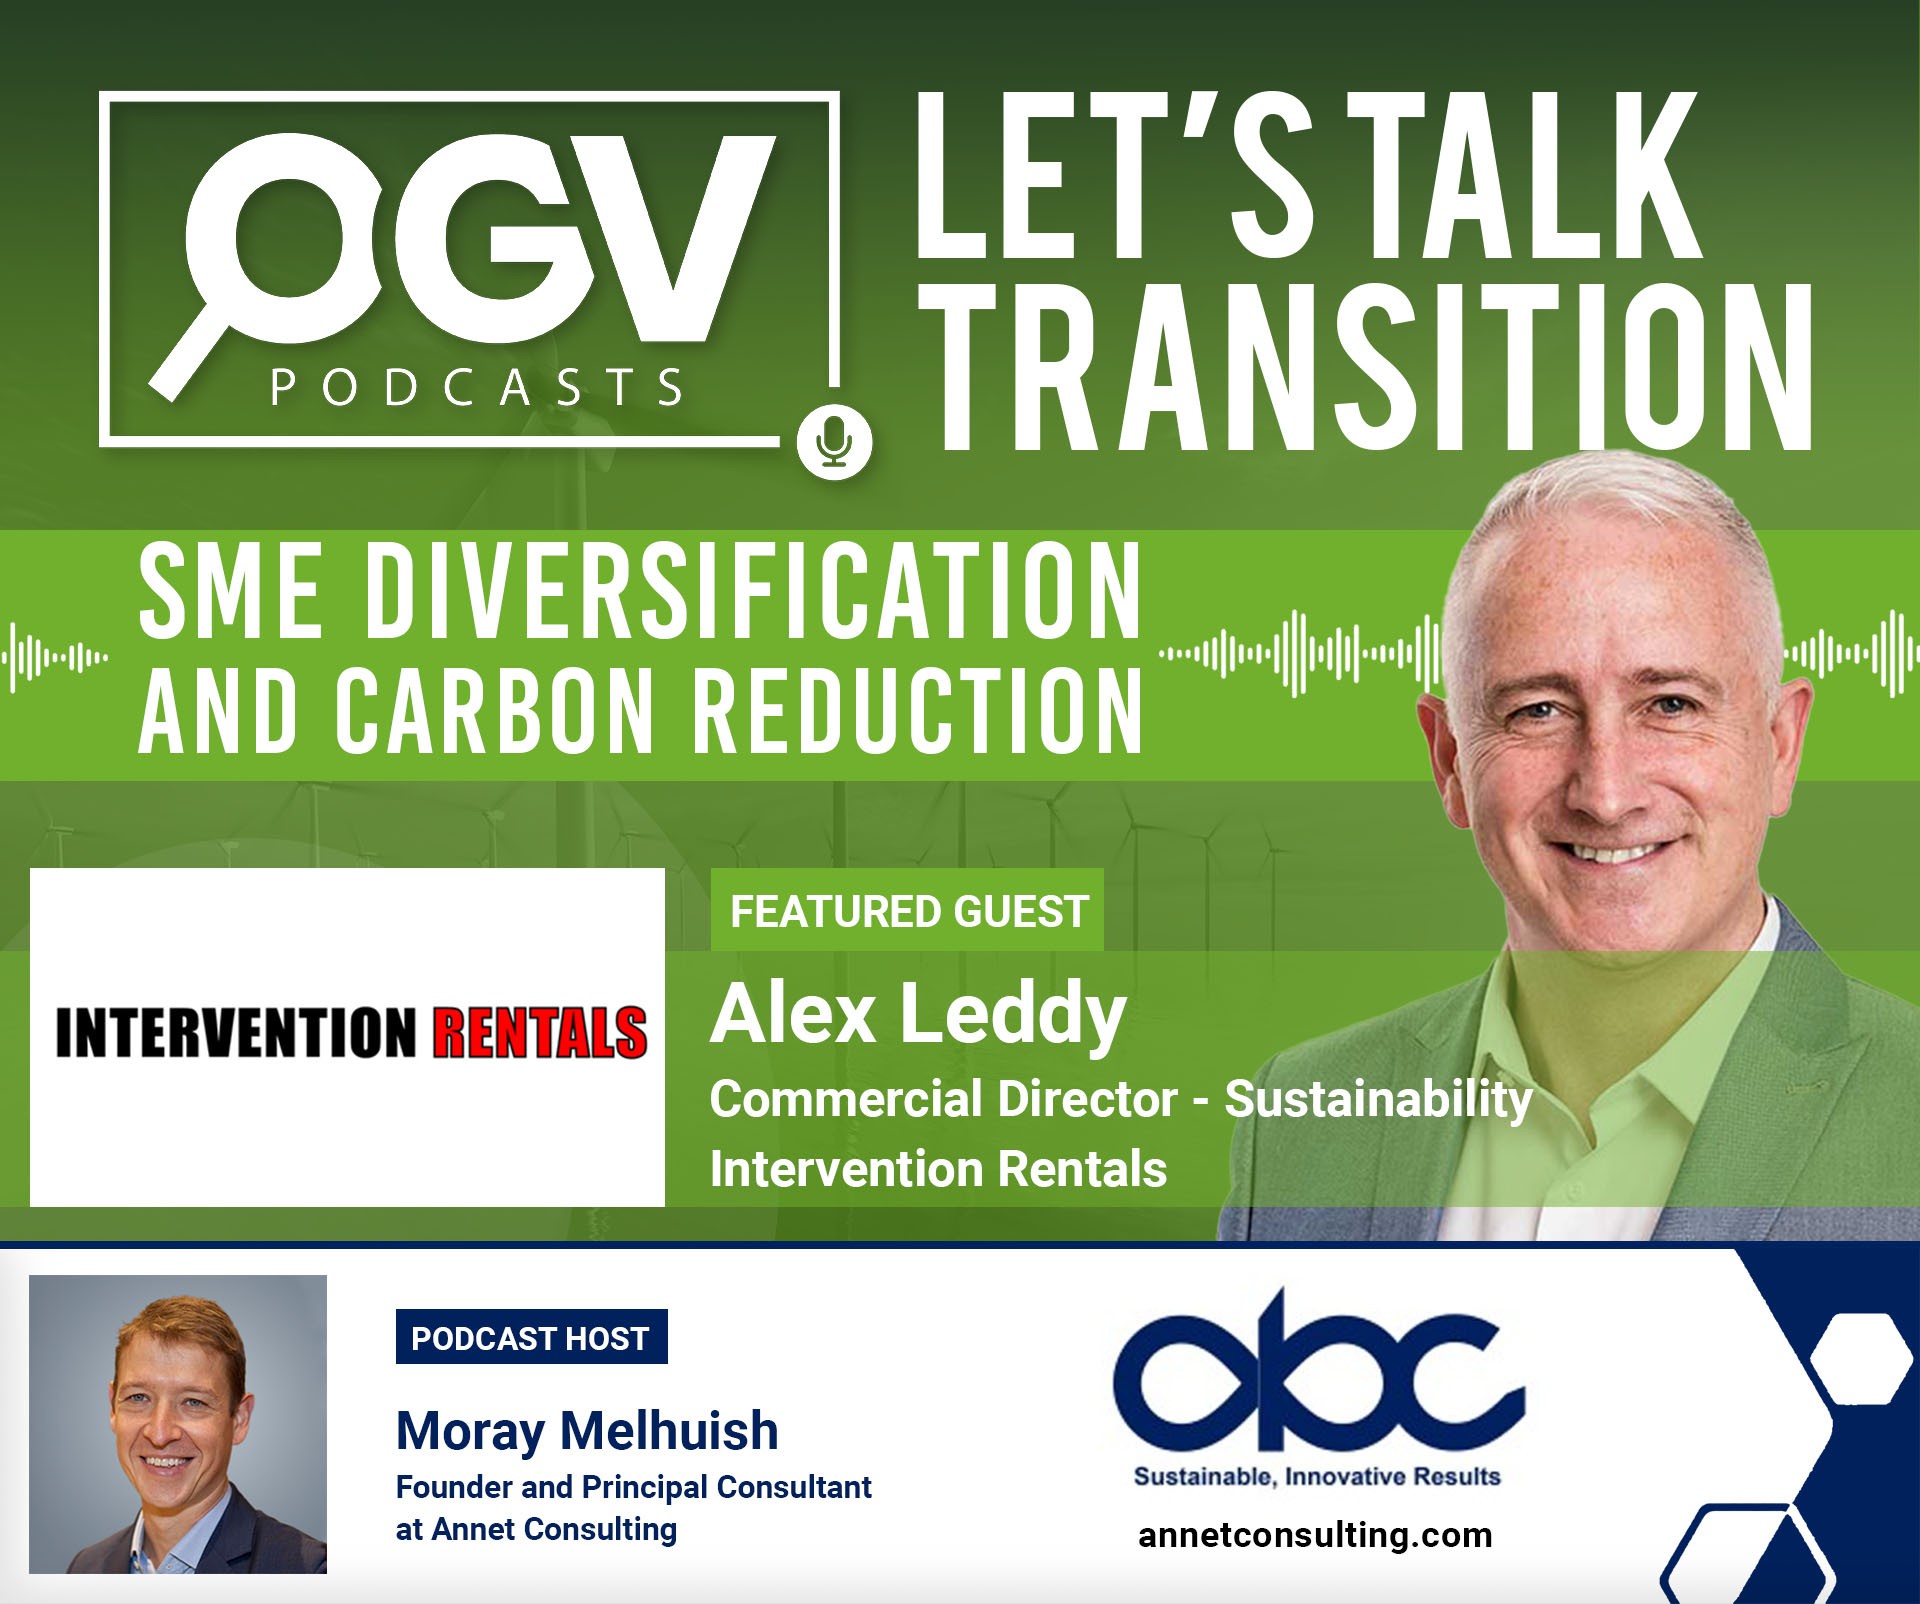 SME Diversification and Carbon Reduction